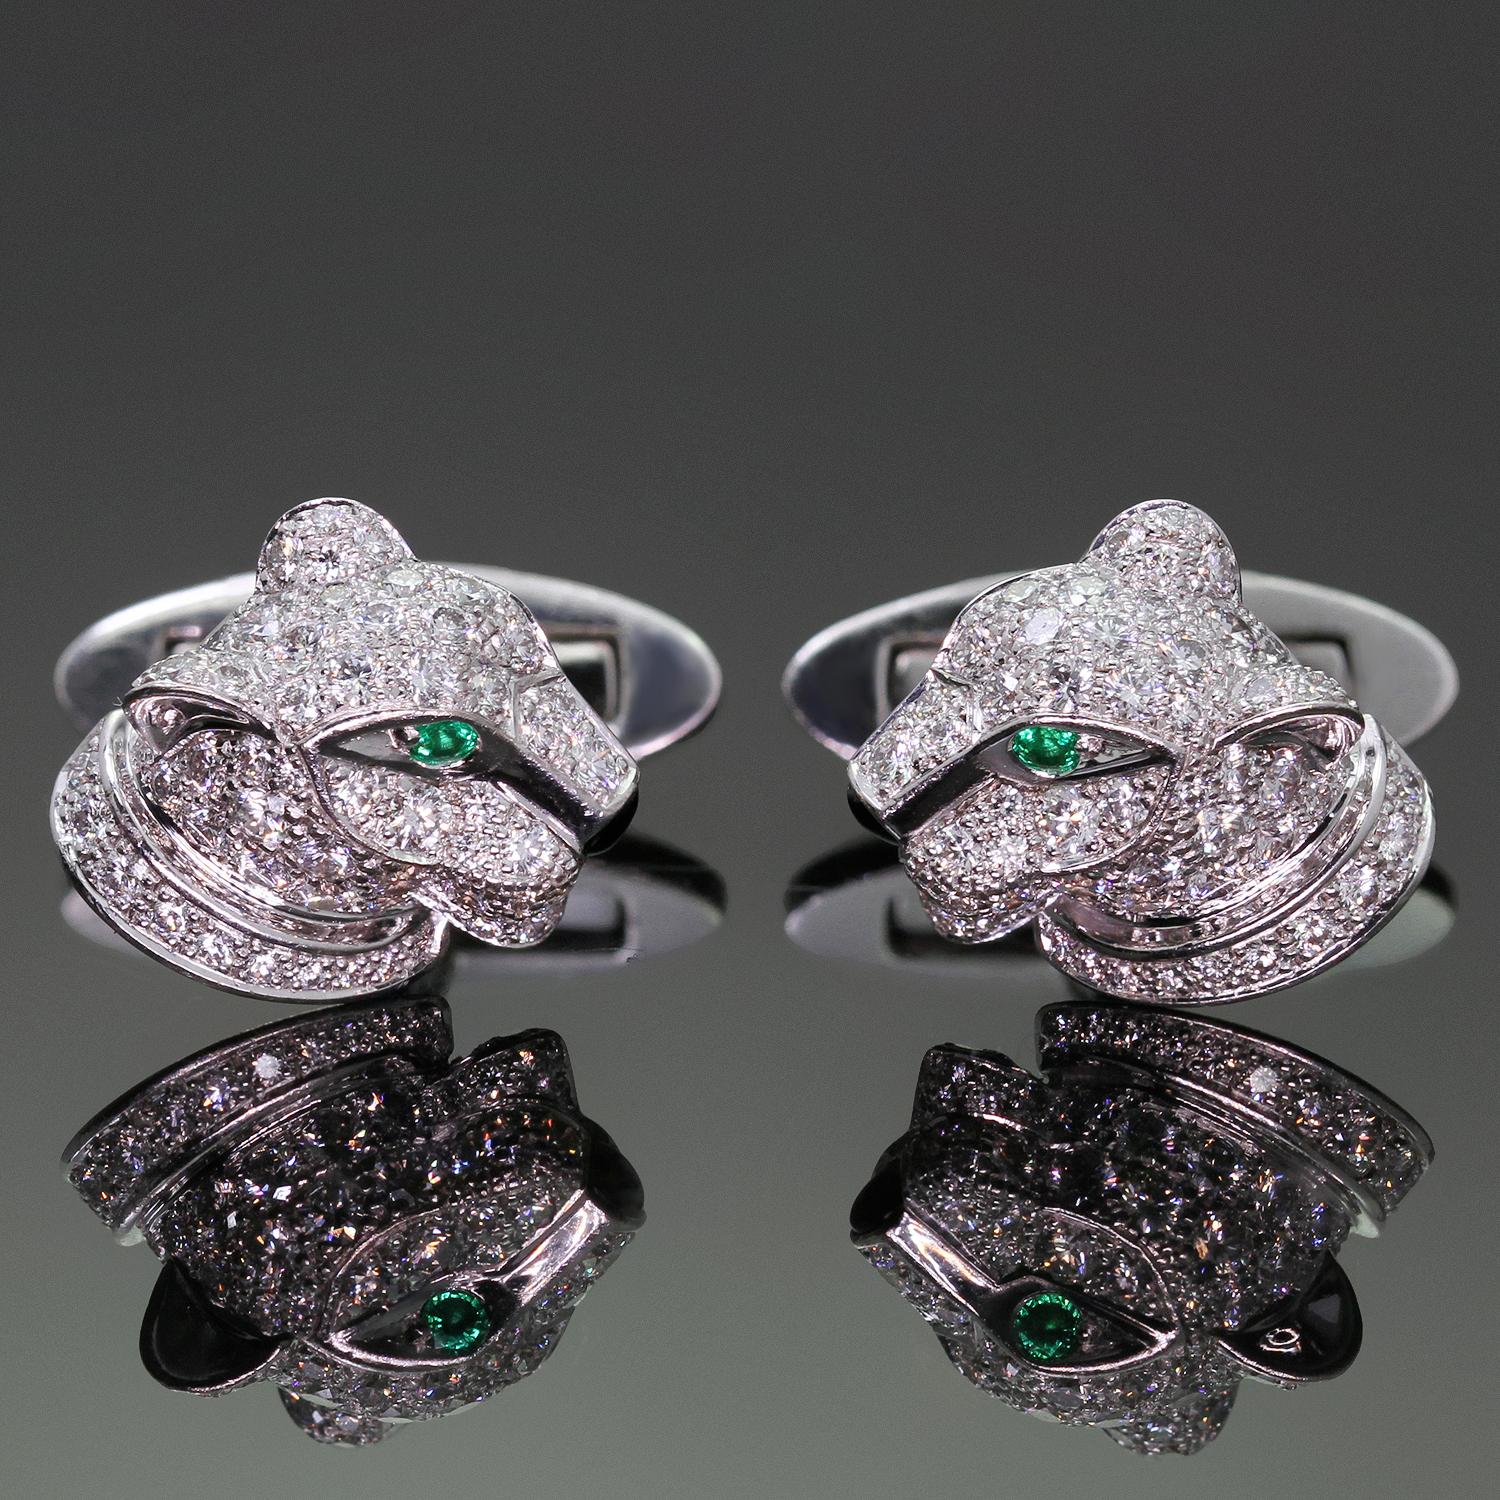 These gorgeous authentic Cartier cufflinks  feature a panther head design crafted in 18k white gold and fully pave-set with round brilliant D-E-F VVS1-VVS2 diamonds, accented with green emerald eyes and black onyx noses. Made in France circa 2000s.